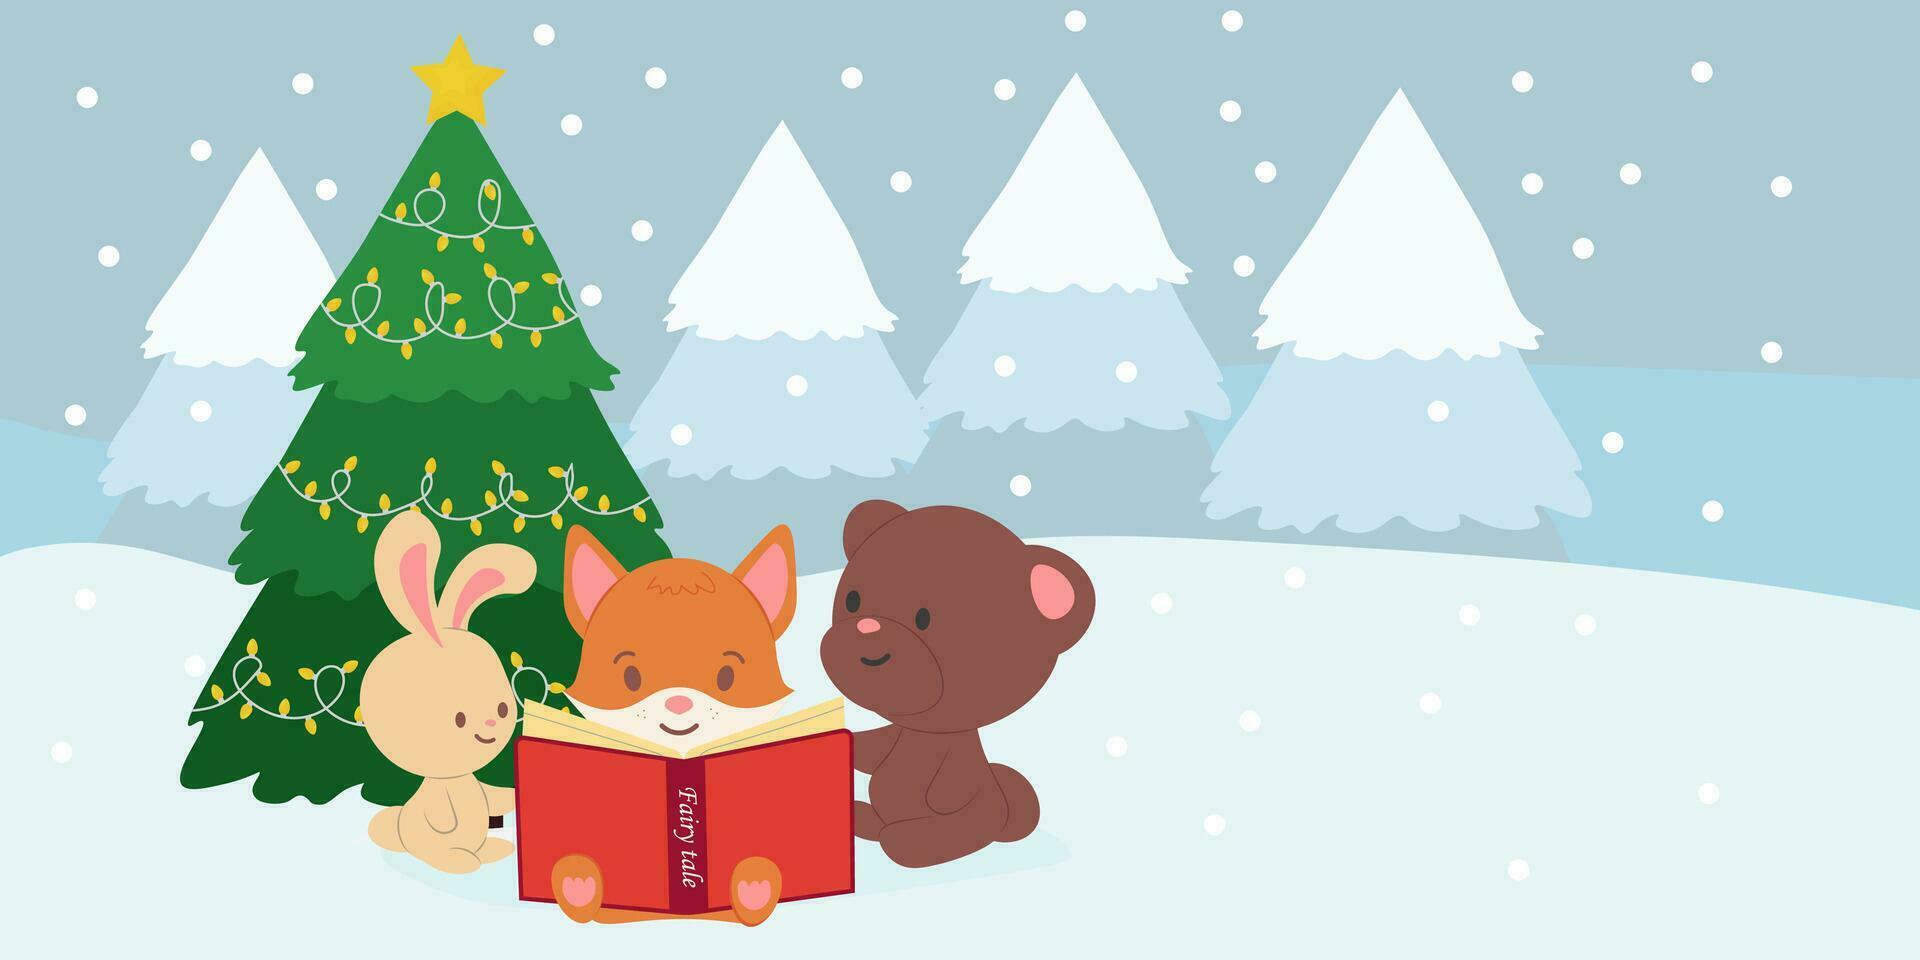 Forest animals read book about Christmas fairy tales. Vector illustration. cute Fox read book in the winter forest, bear and rabbit read fairy tales.